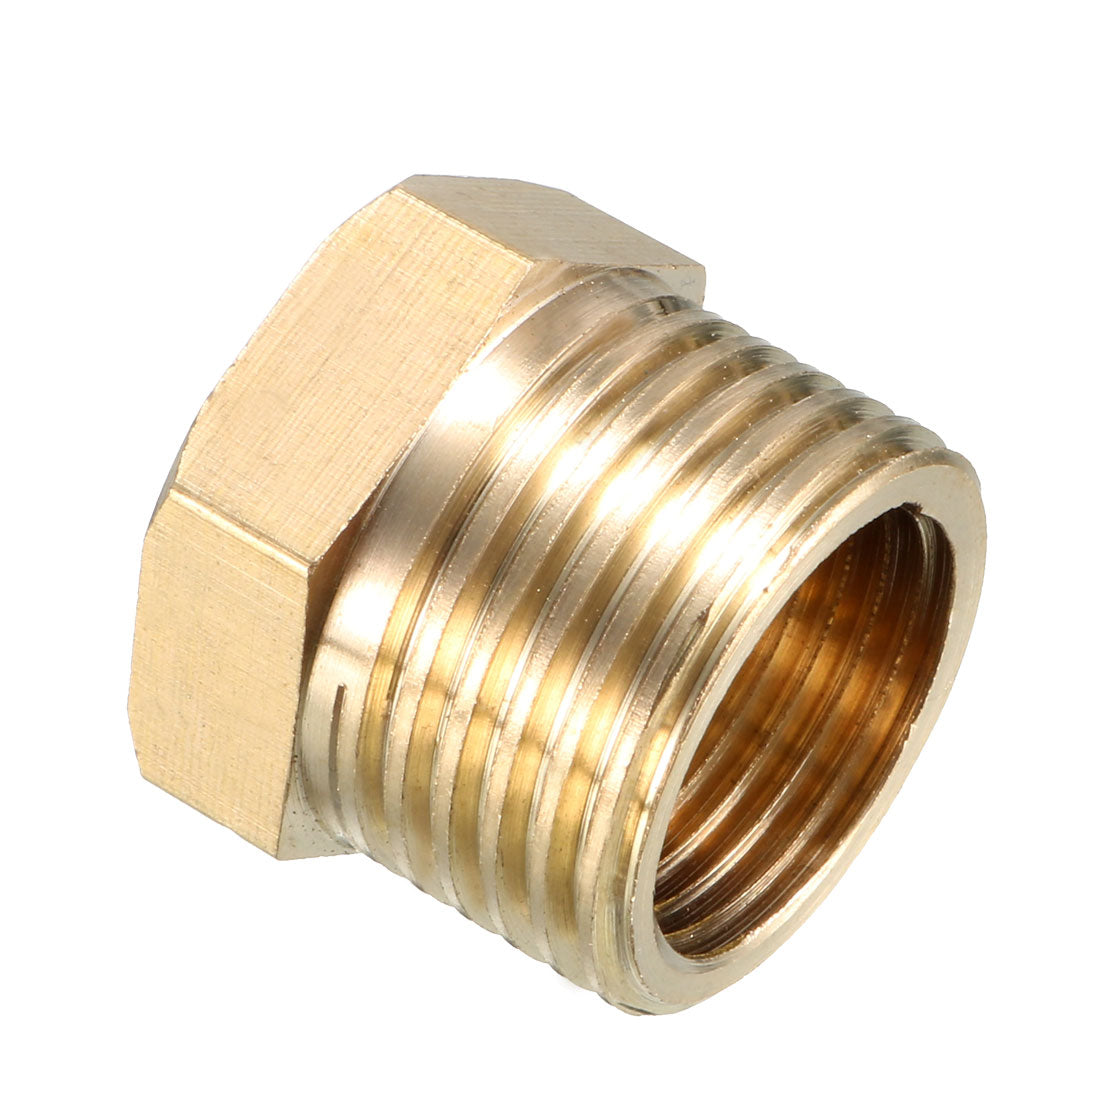 uxcell Uxcell Brass Threaded Pipe Fitting G1/2 Male x G3/8 Female Hex Bushing Adapter 2pcs